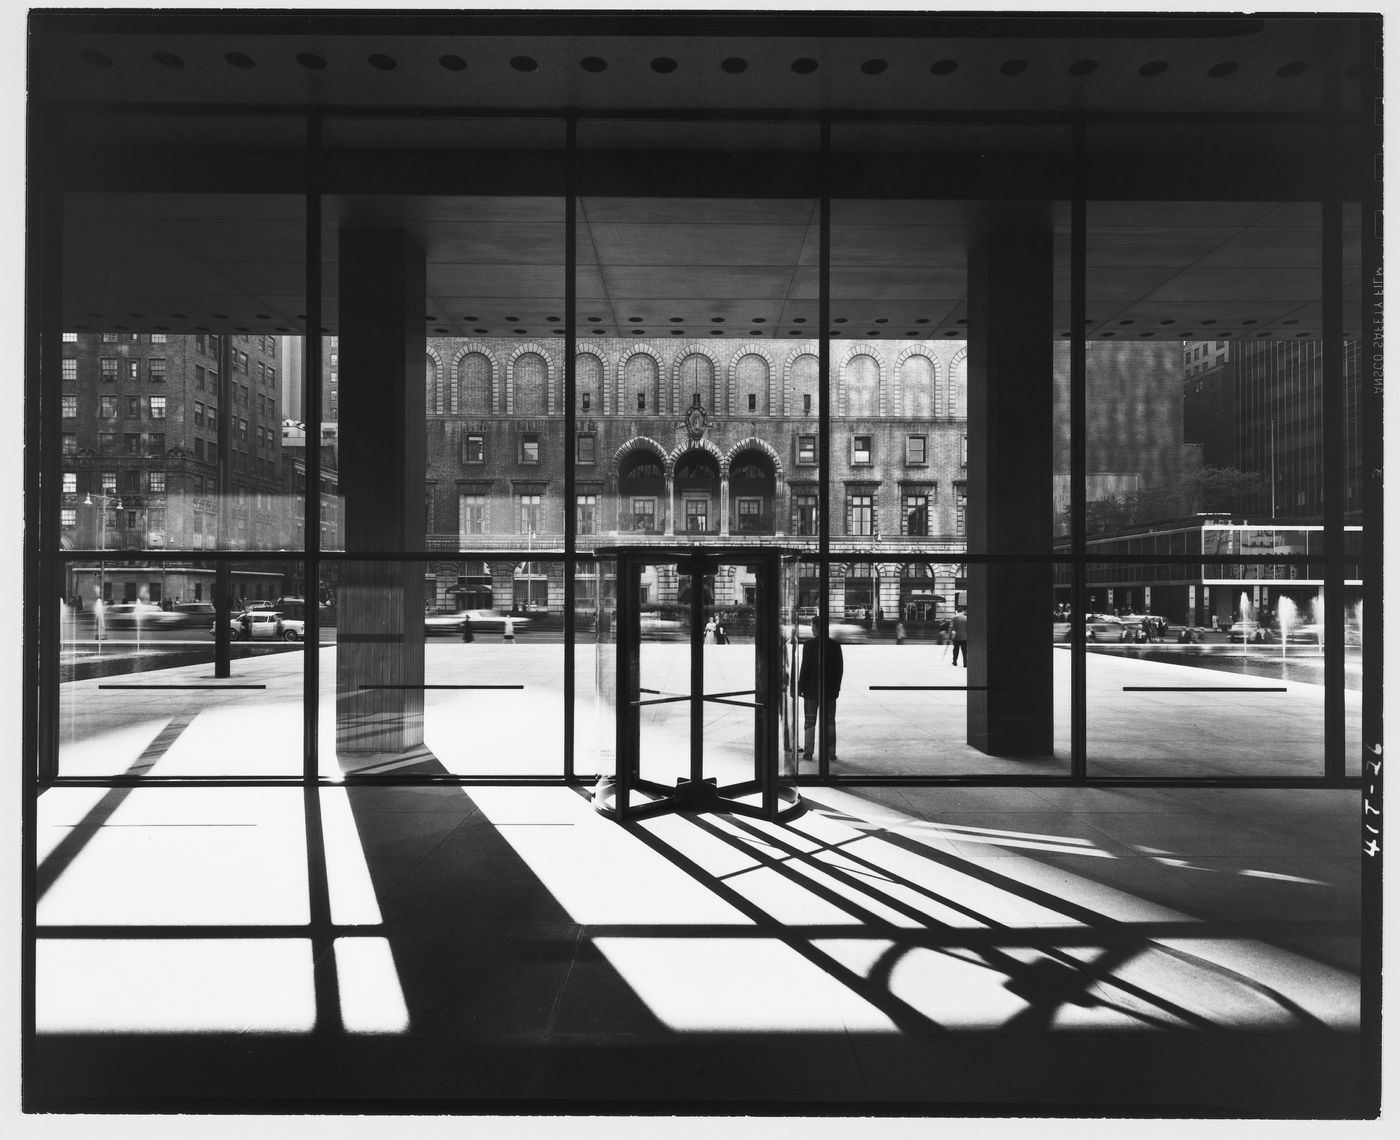 View of the plaza of the Seagram Building through a revolving glass door, New York City